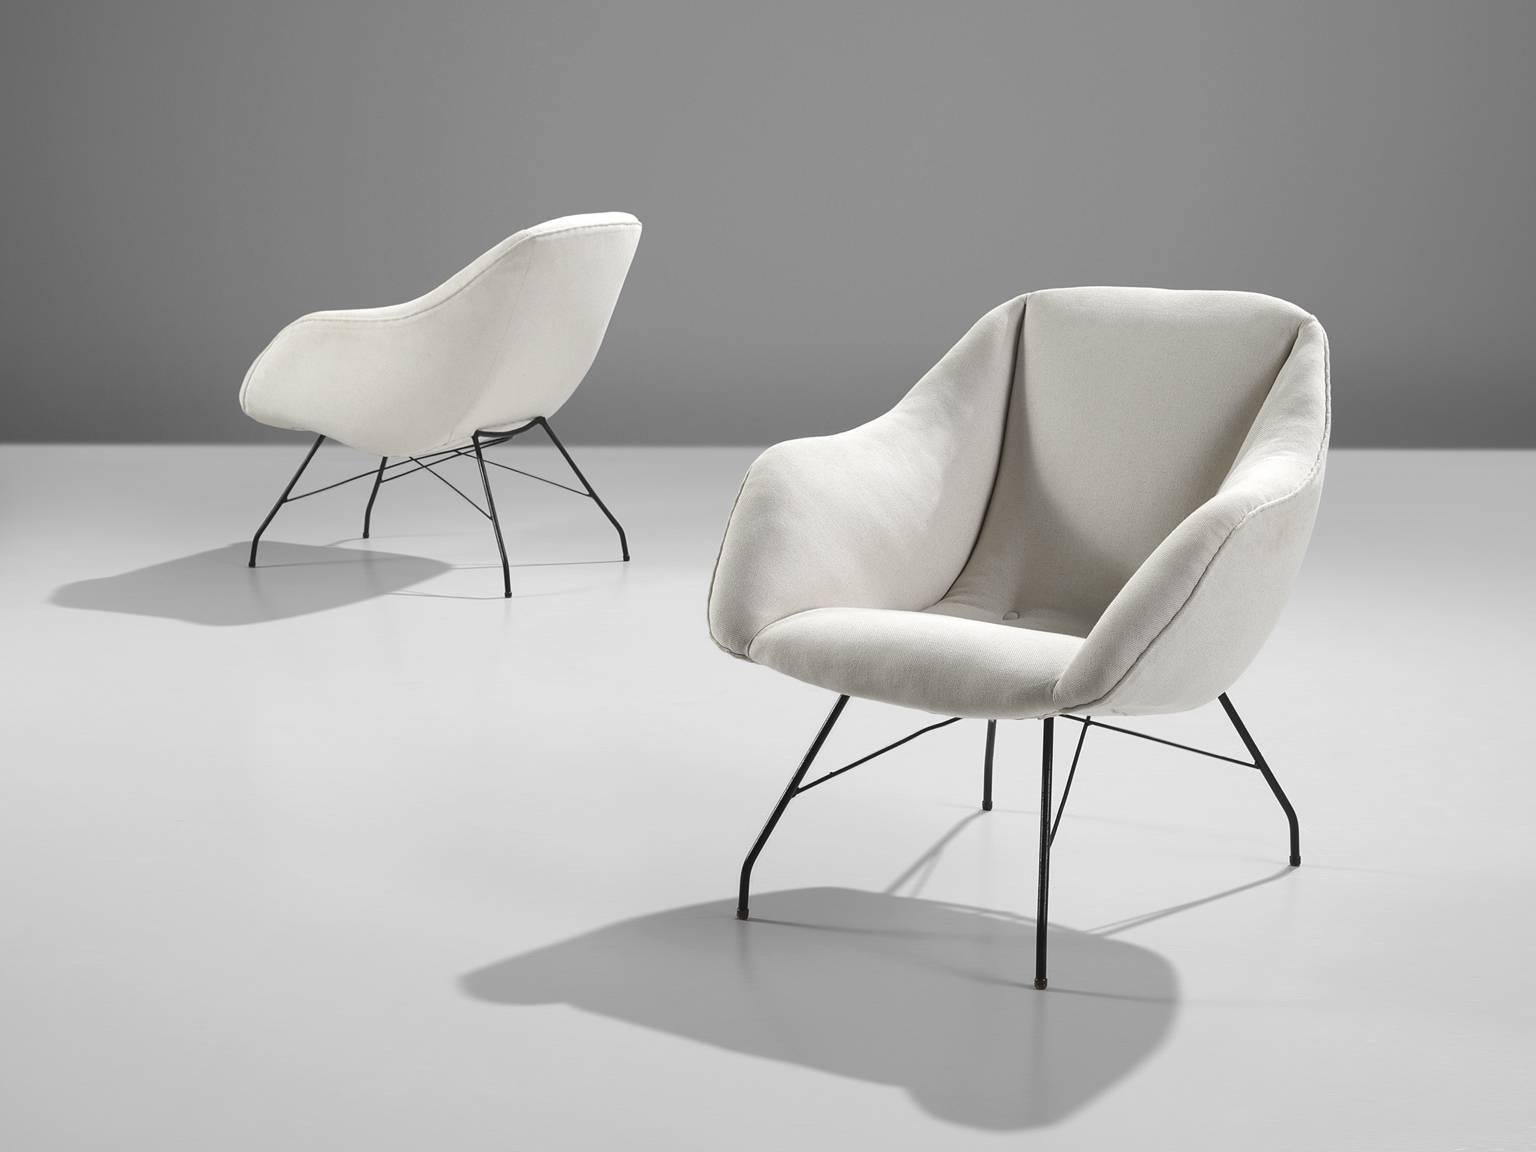 Pair of armchairs, in iron and fabric by Carlo Hauner for Móveis Artesenal, Brazil, 1950. 

Elegant and modern lounge chairs by Brazilian designer Carlo Hauner. The frame is made from black coated iron. Due the diagonal connection and lines and